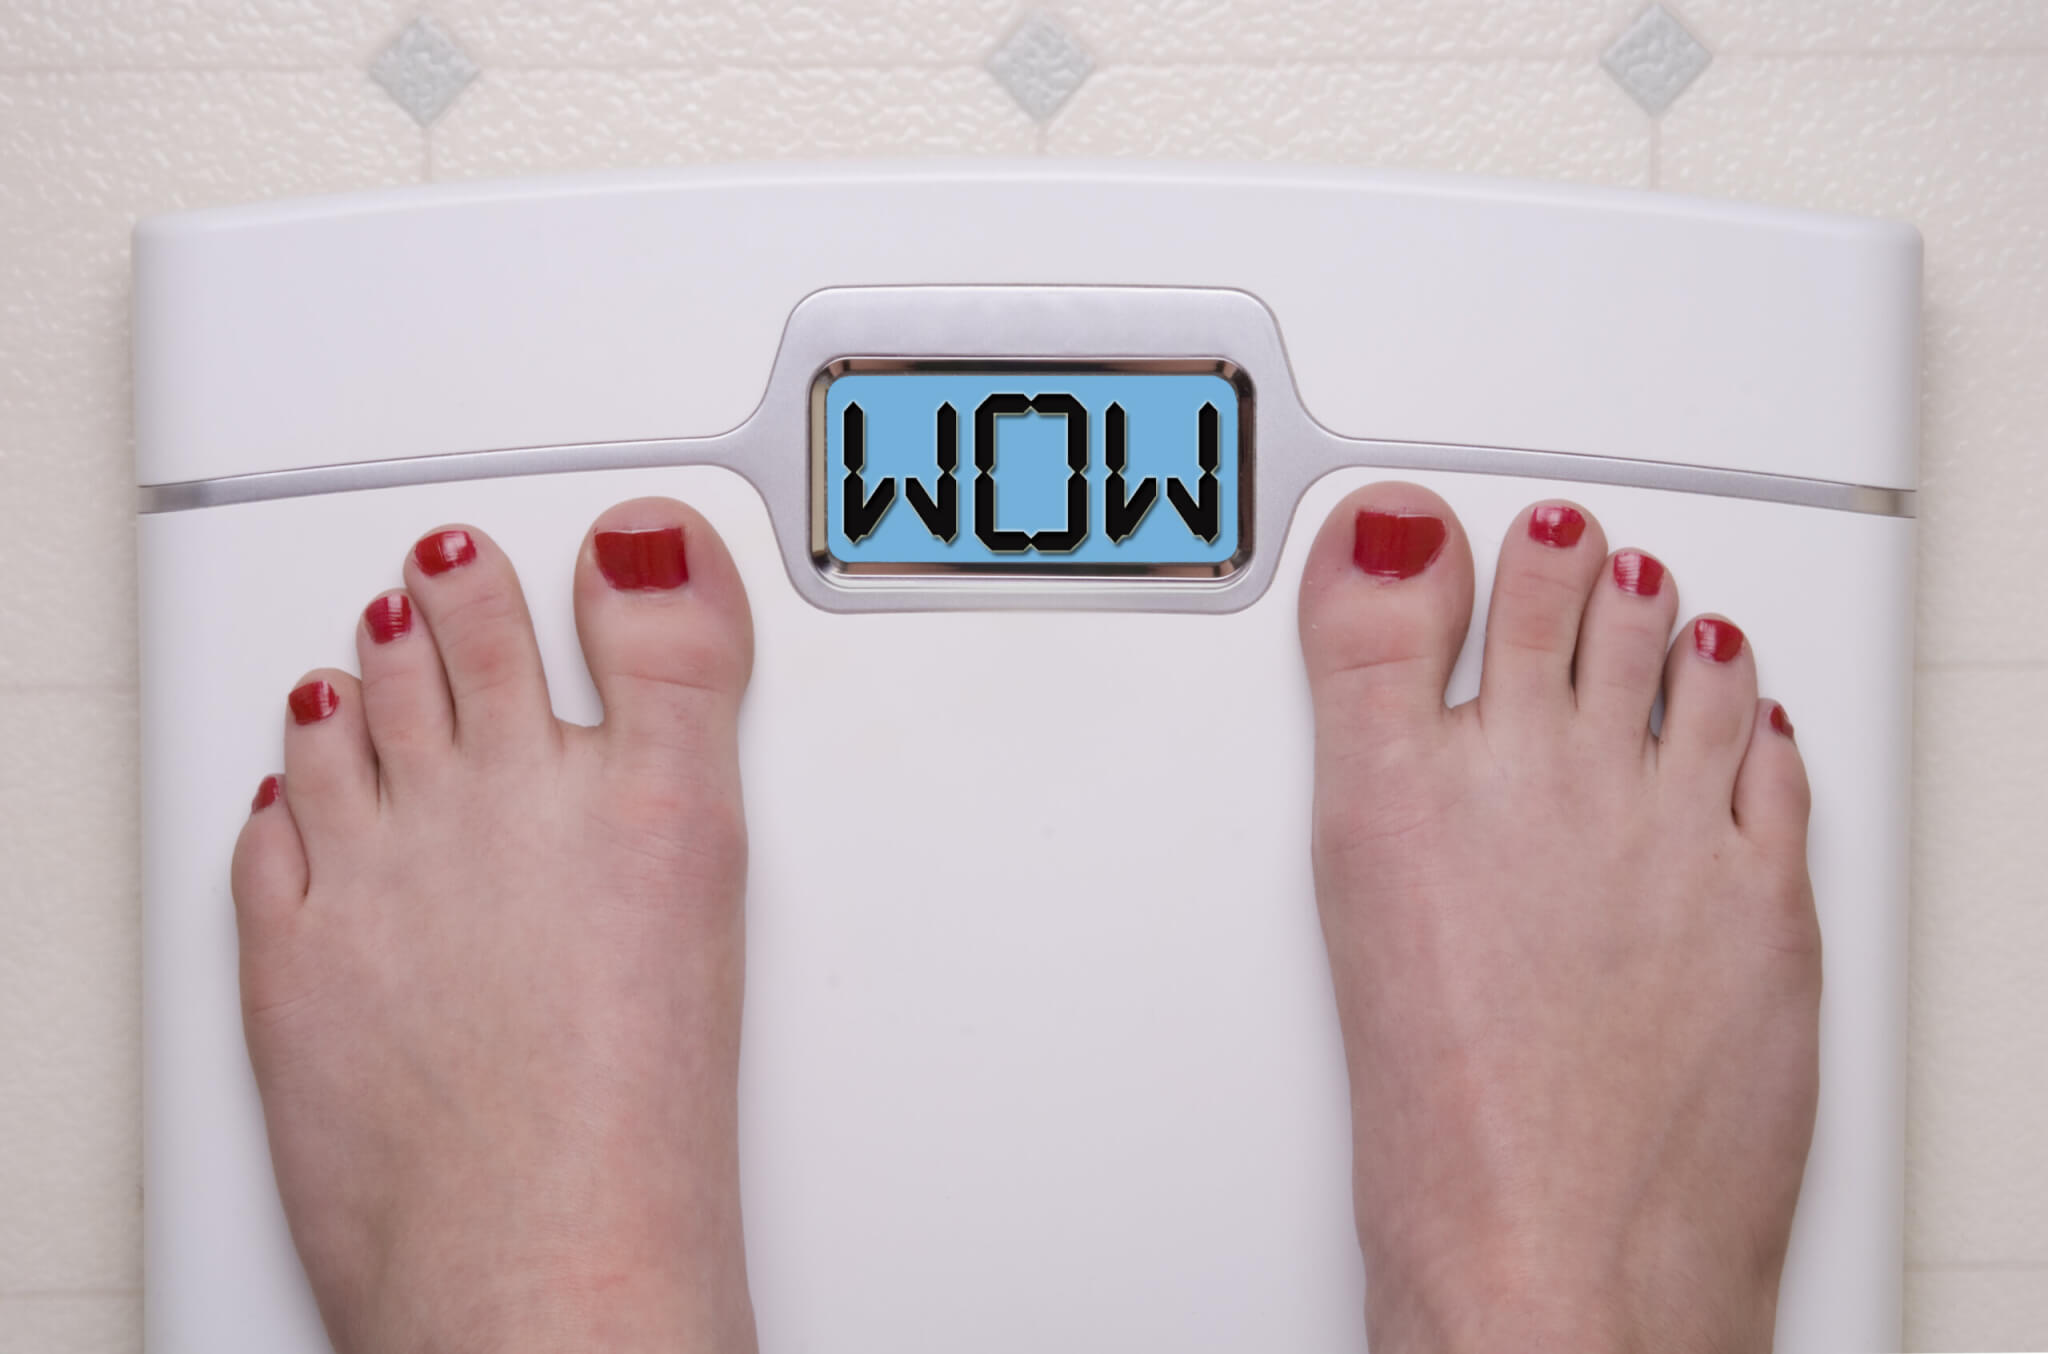 Woman weighing herself on scale that says "WOW"